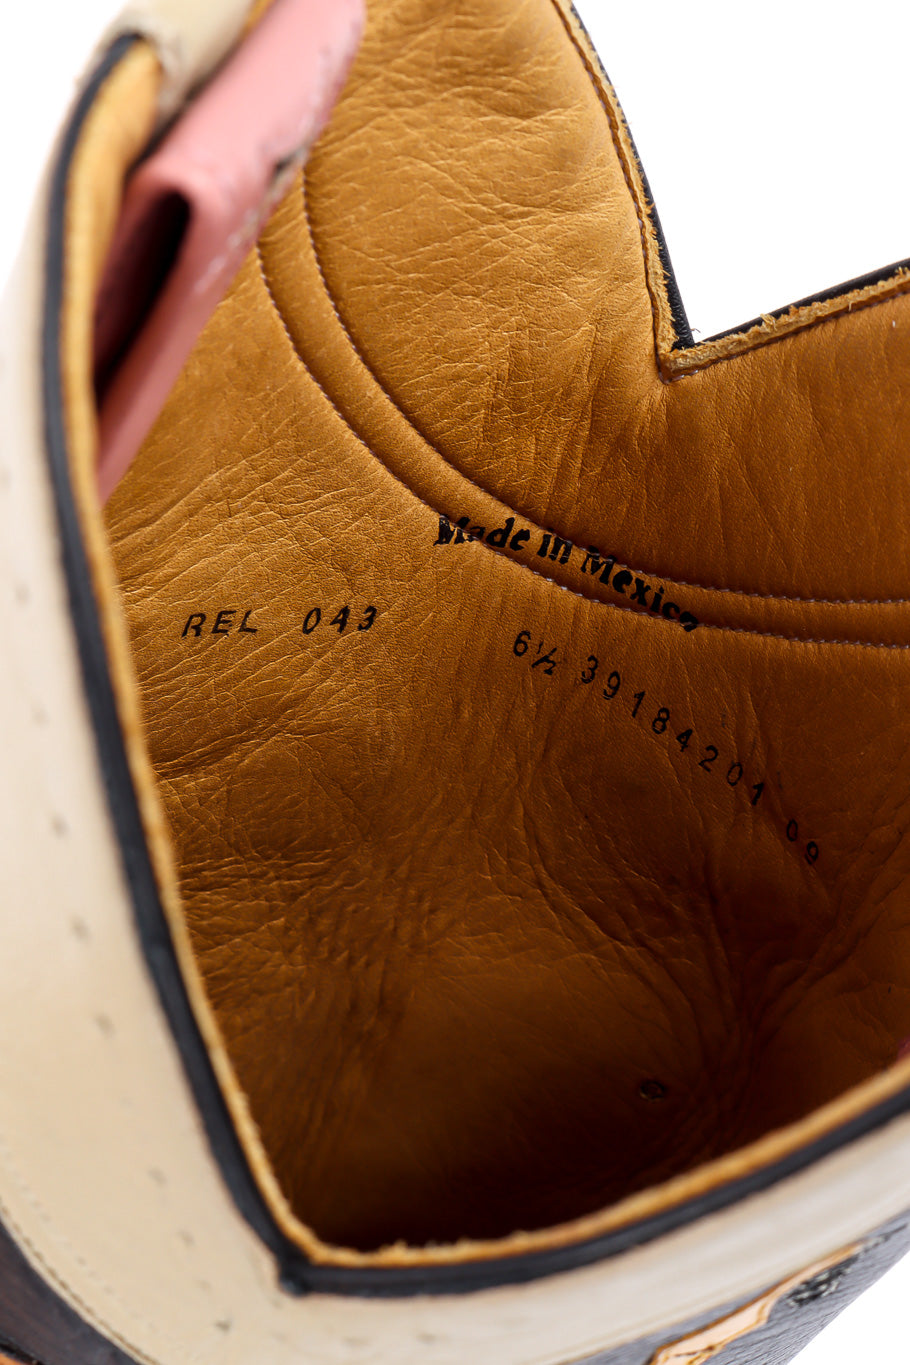 Liberty Boot Co. Kiss My Axe Western Boots size and serial number closeup @Recessla